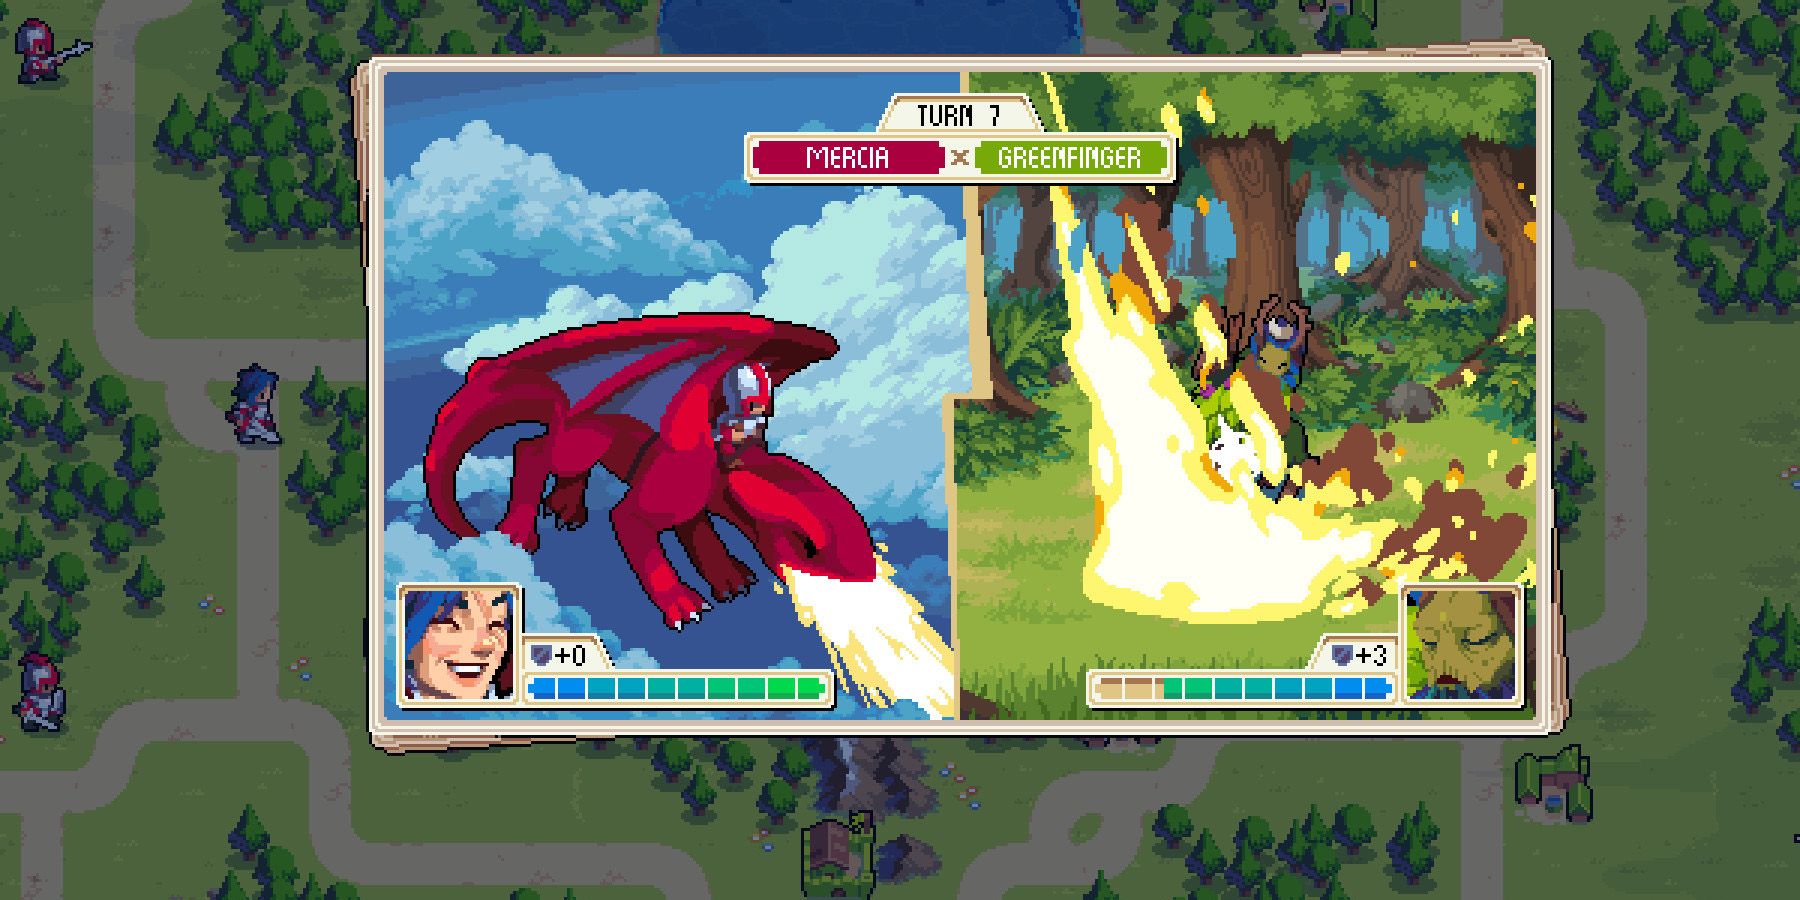 Dragon breathes fire at enemies in the forest in Wargroove